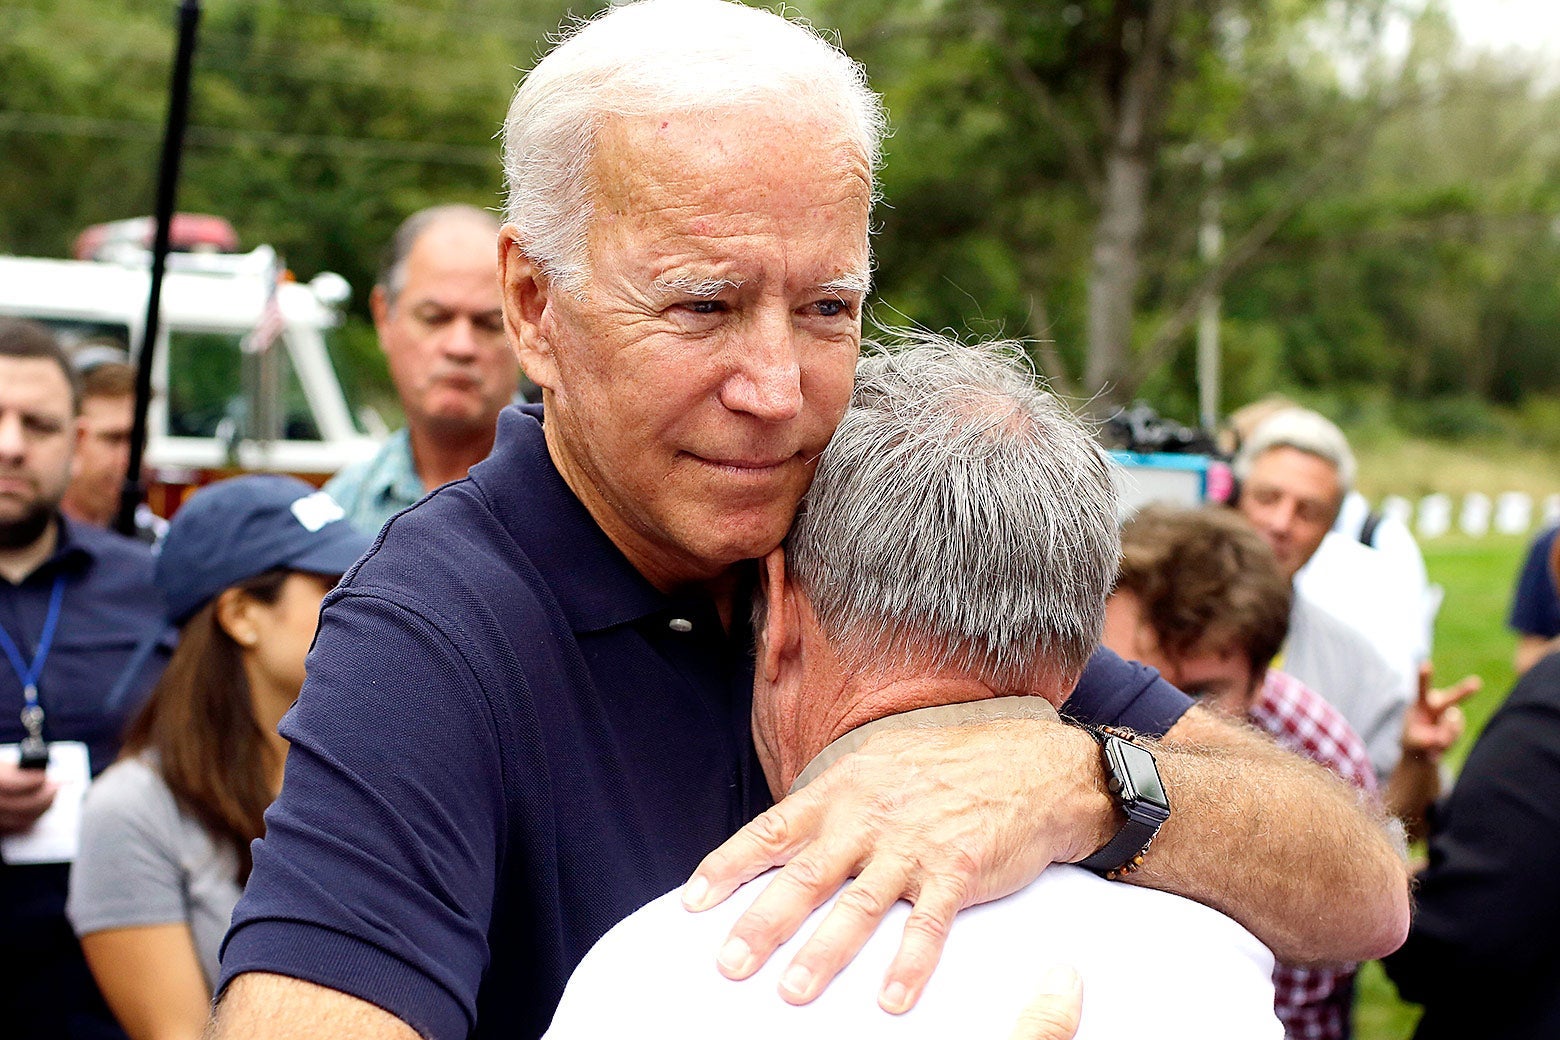 Biden hugging an older man in front of a crowd of supporters